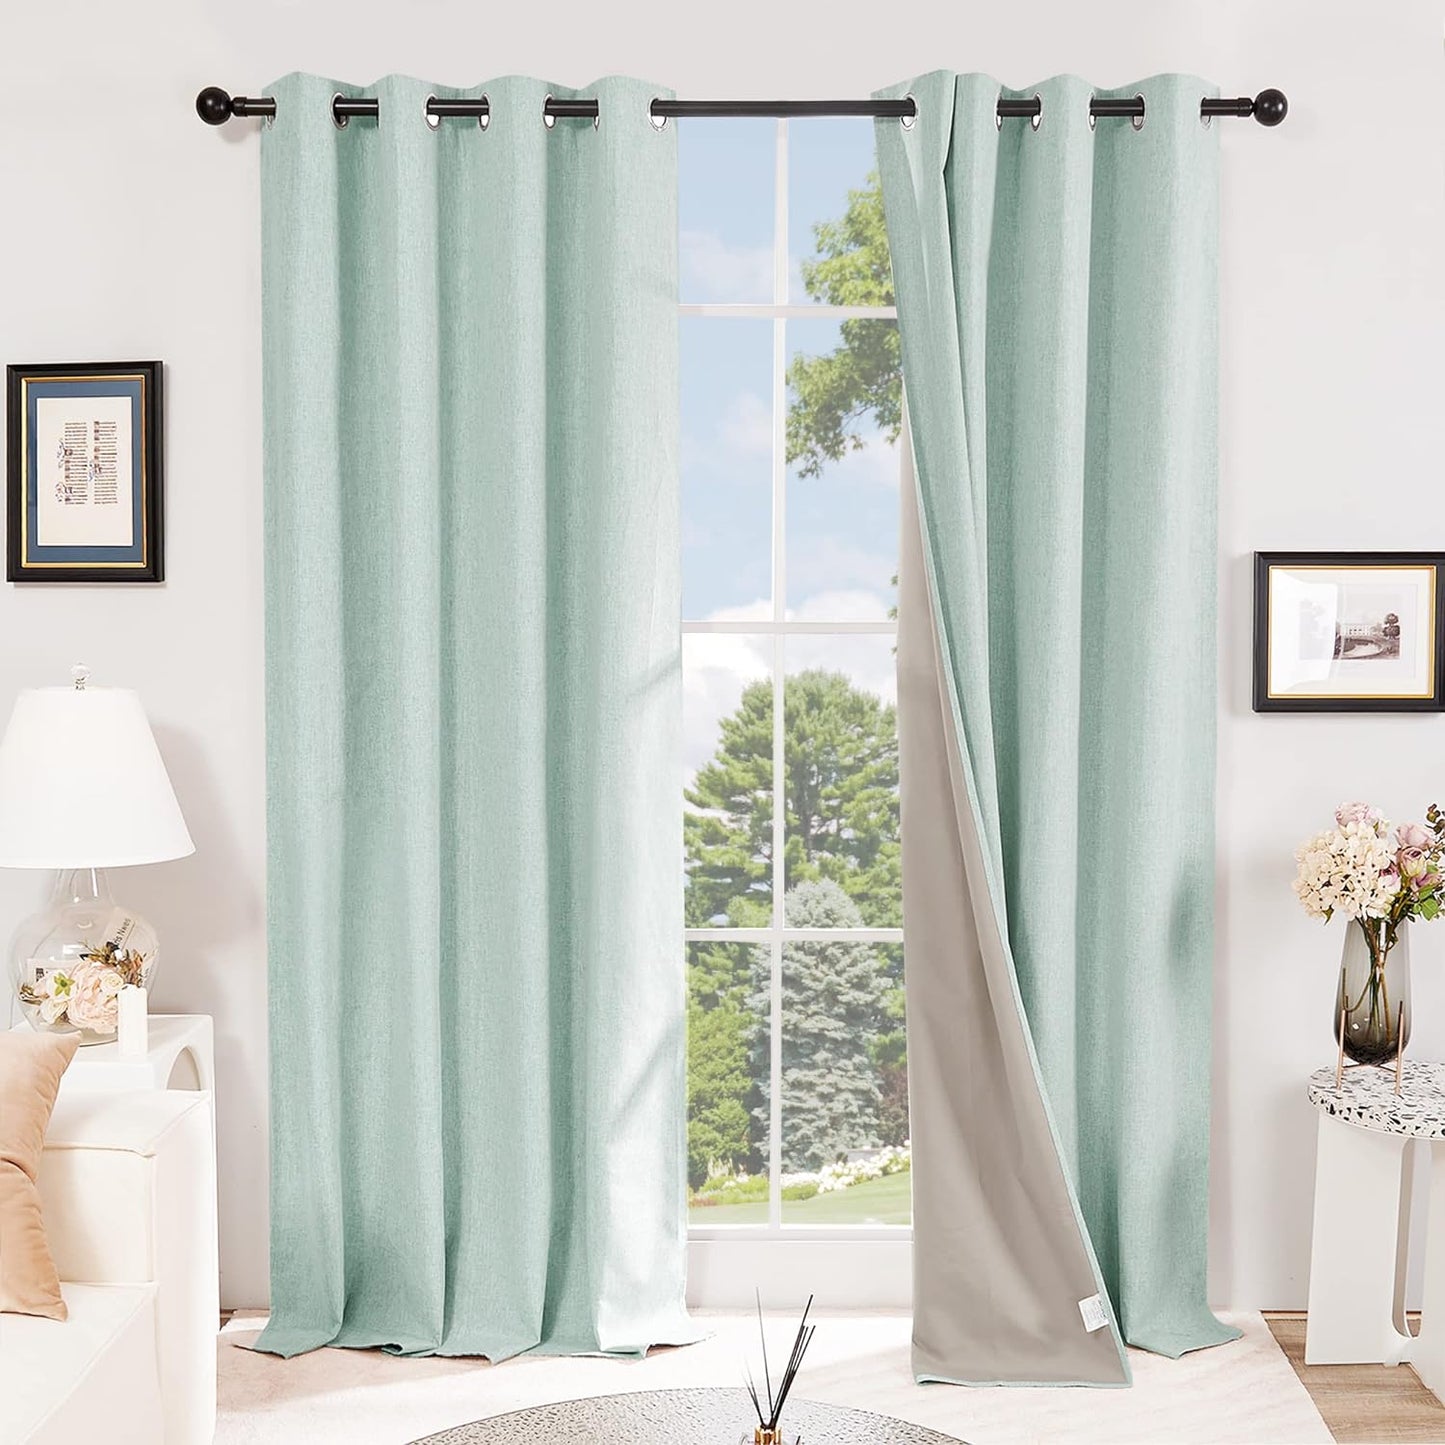 Deconovo Faux Linen Total Blackout Curtains 63 Inches Length, Light Blue, Grommet Thermal Insulated Curtain, Noise Reduction Draperies for Bedroom Living Room, 52" W X 63" L, 1 Pair  DECONOVO Light Green 52Wx45L Inch 